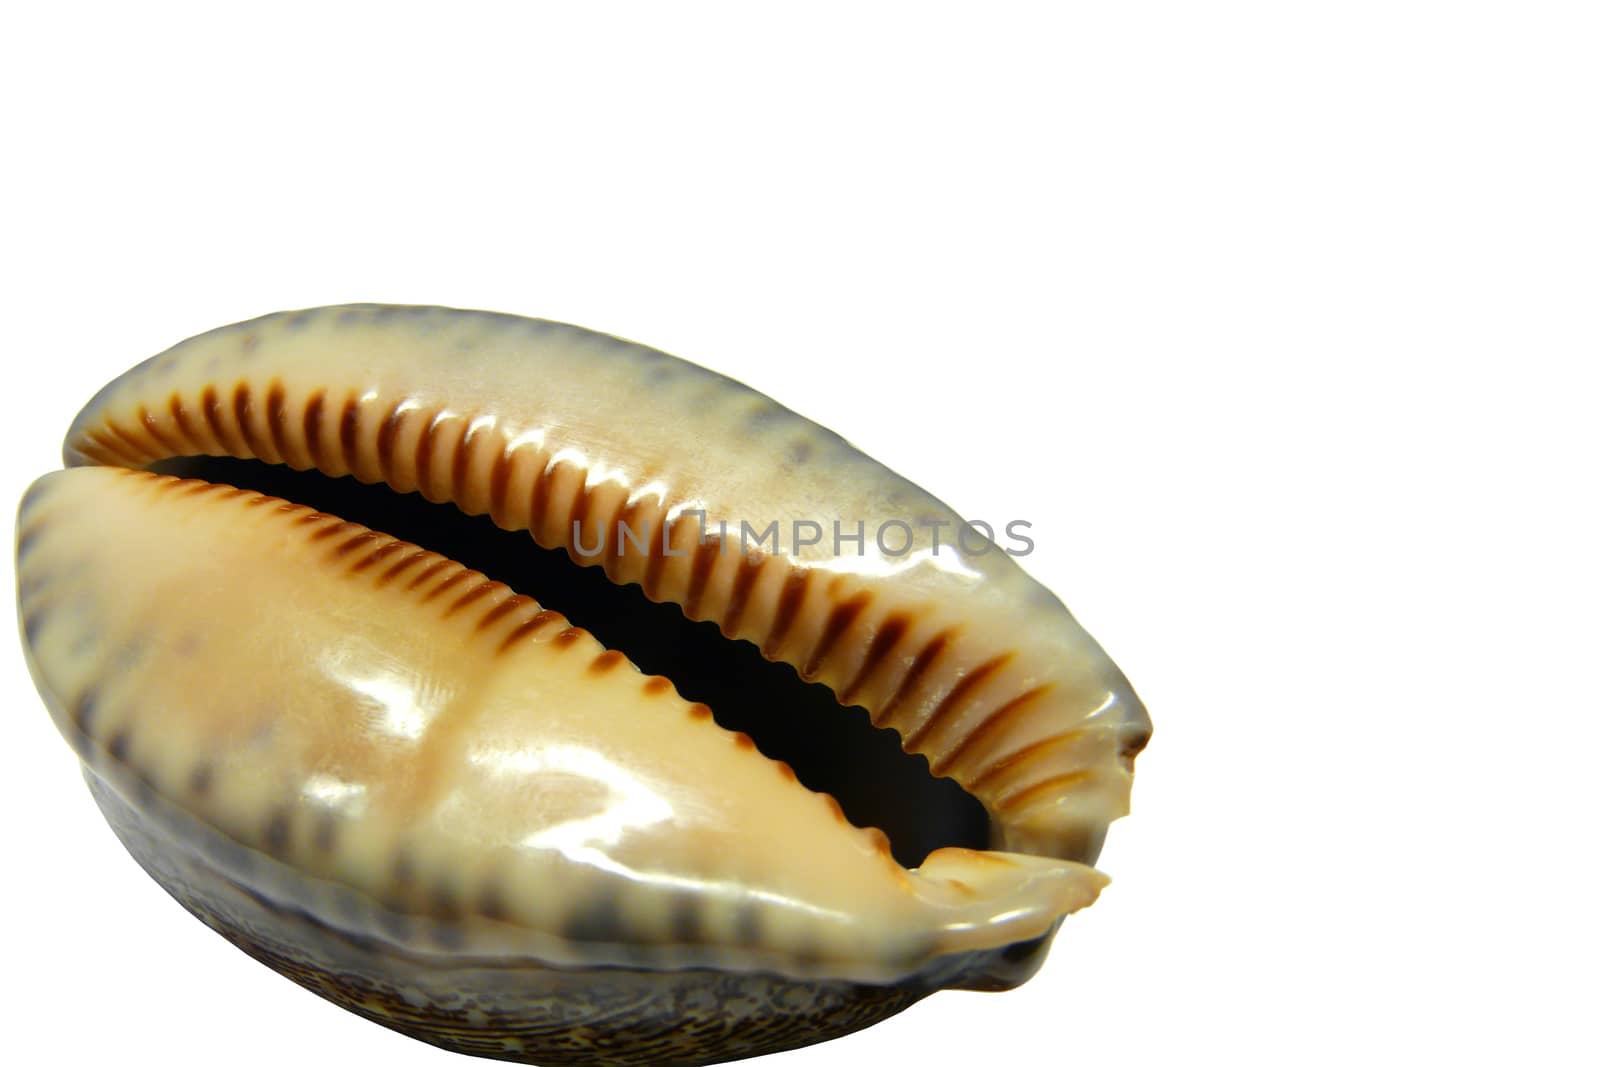 Seashell on white background by EugenP